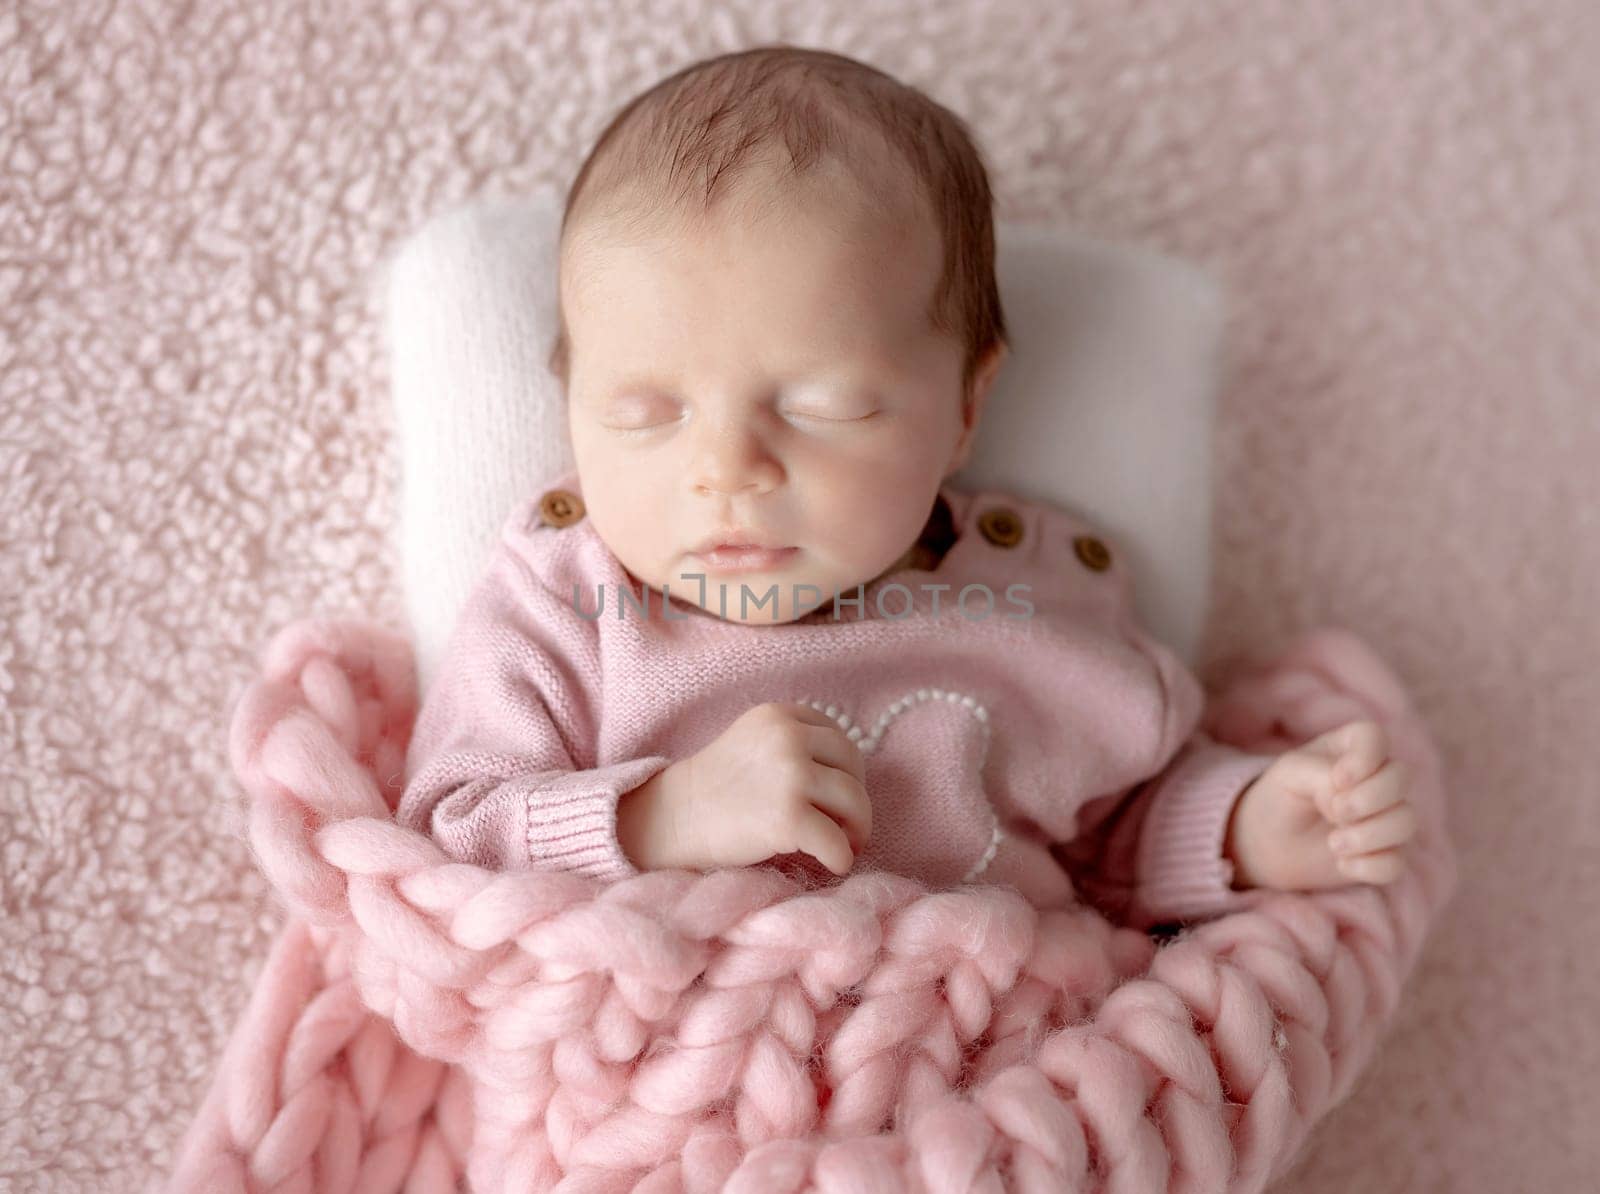 Baby Girl In Pink Outfit Sleeps by tan4ikk1